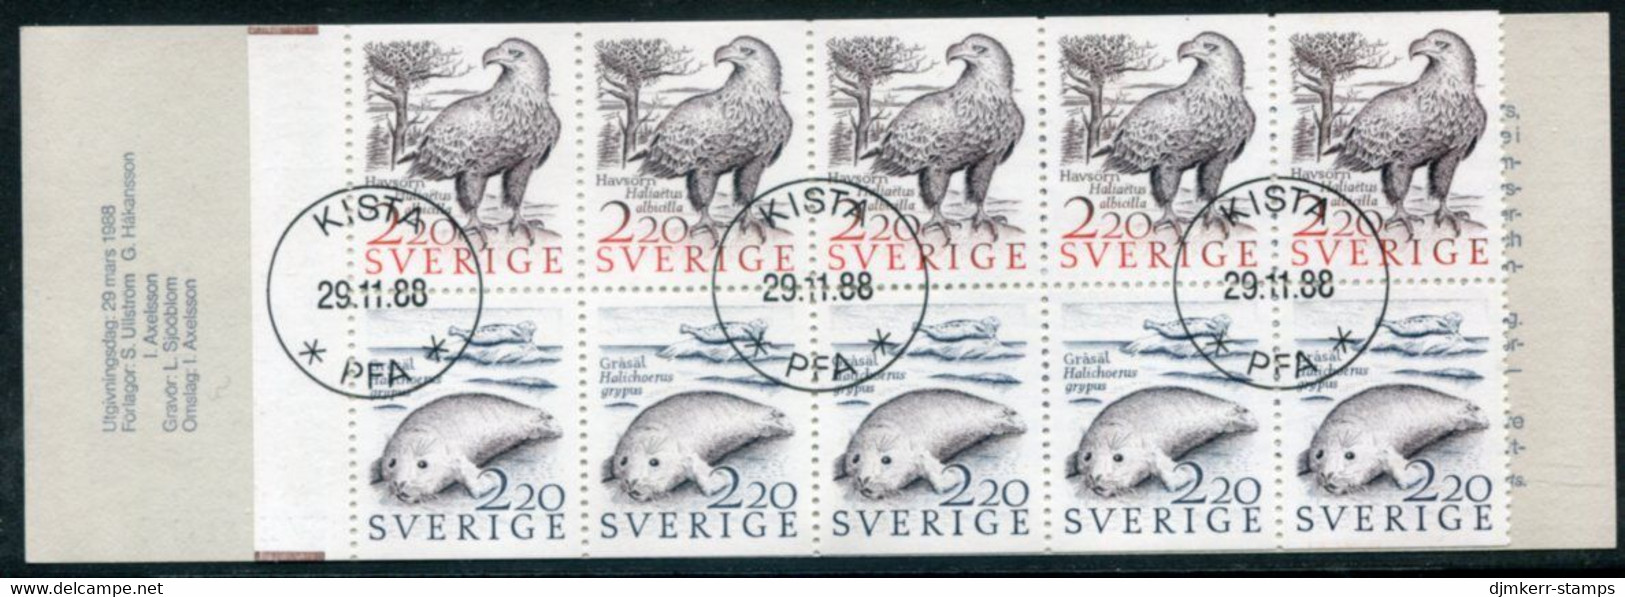 SWEDEN 1988 Coastal Fauna Booklet Stamps Used.  Michel 1480-81 - Used Stamps